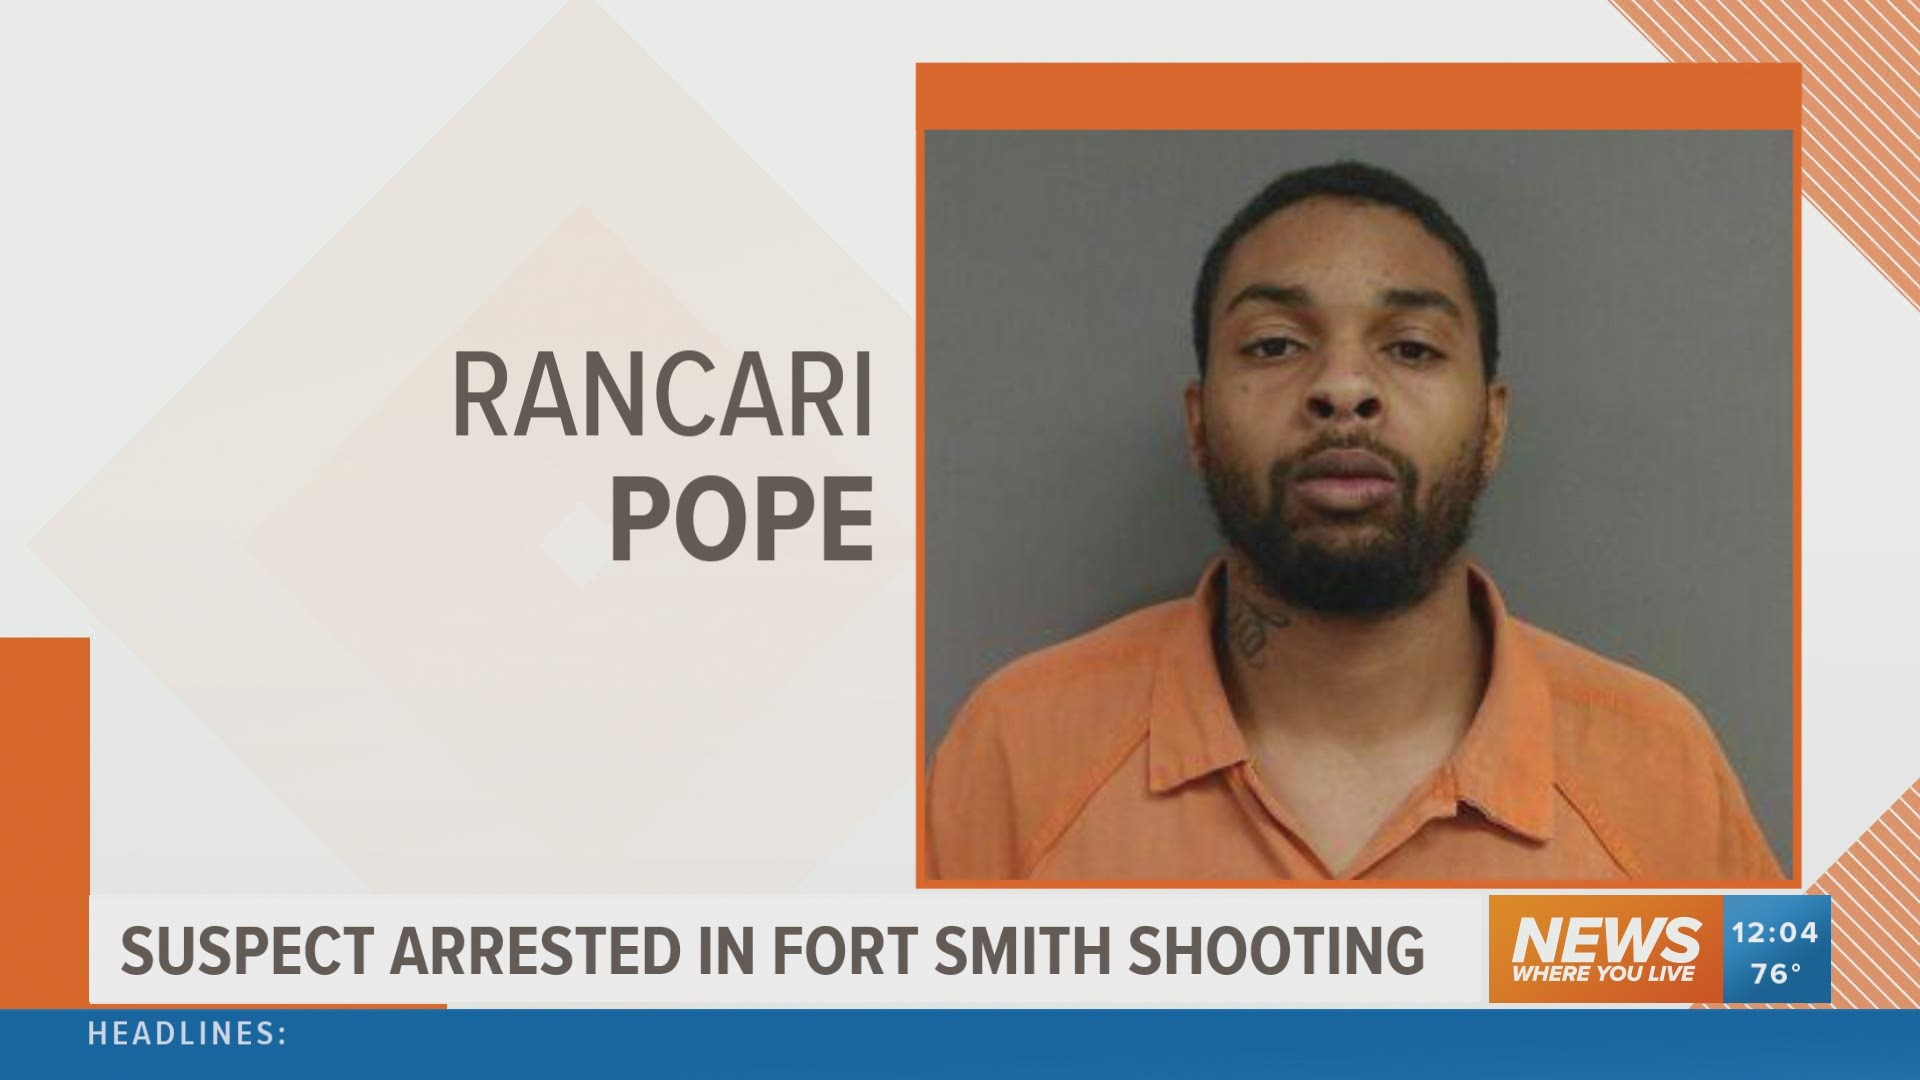 Suspect arrested in Fort Smith shooting.